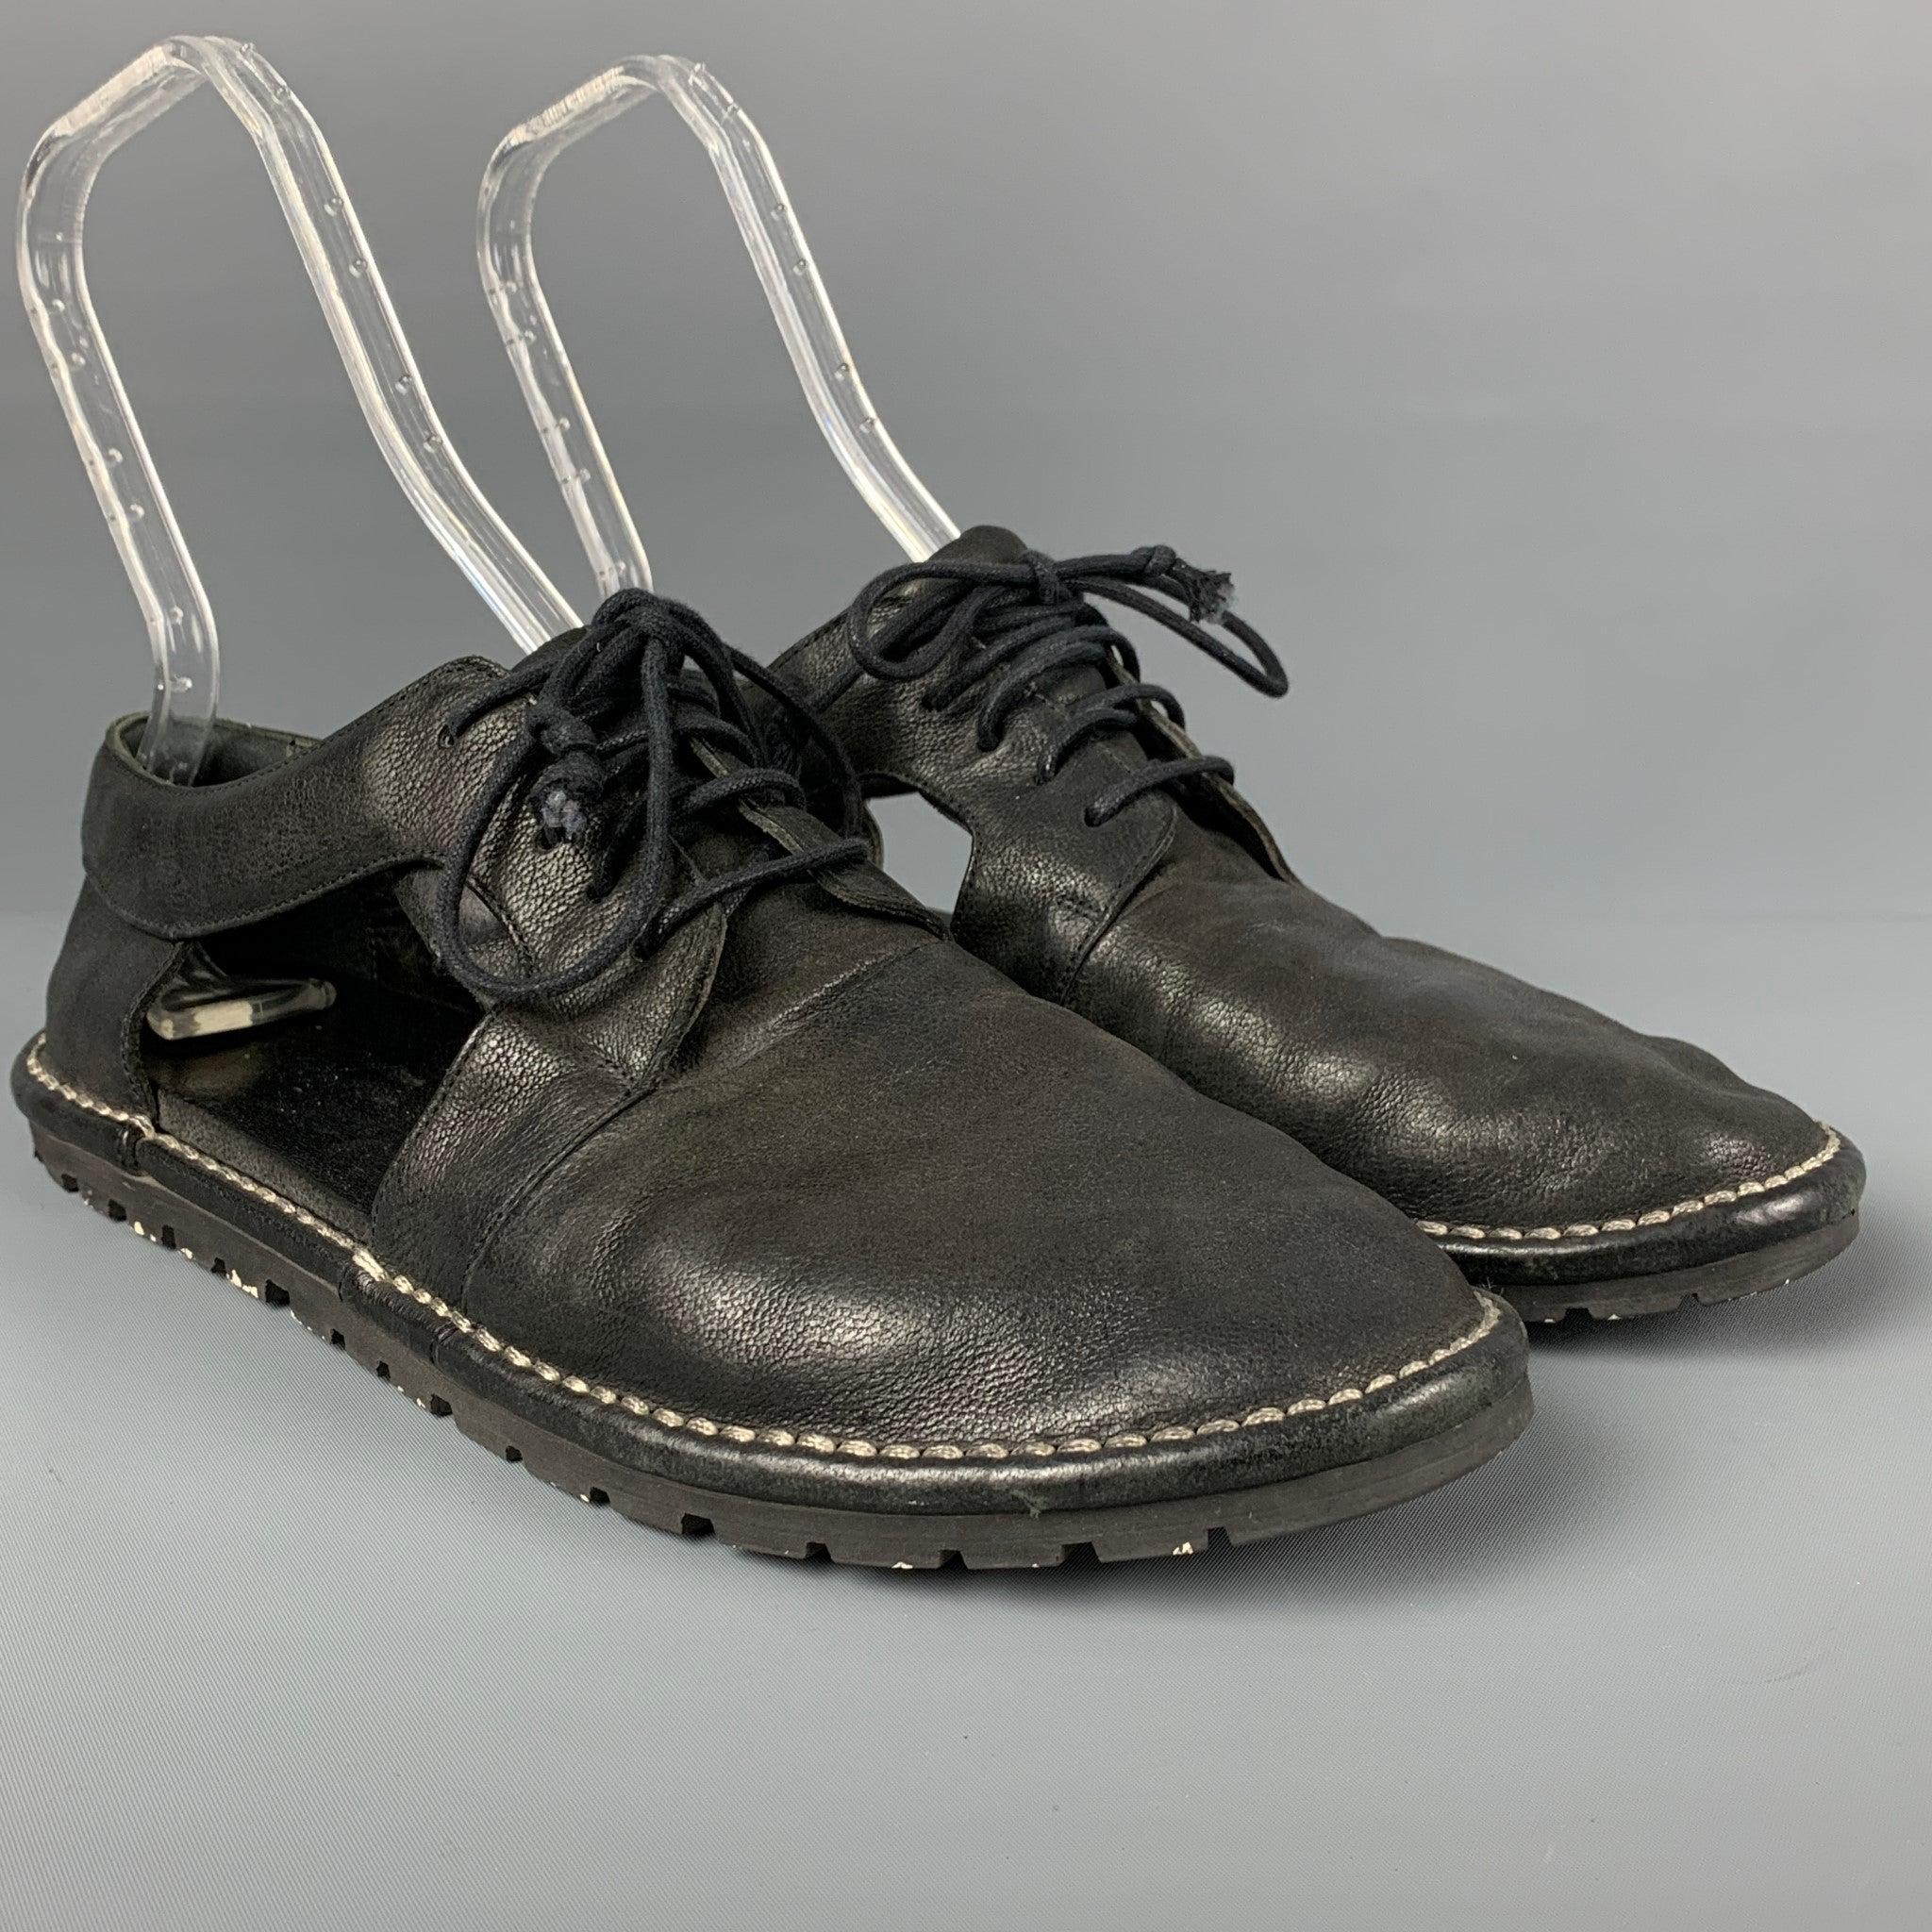 MARSELL shoes comes in a black leather featuring cutout designs, contrast stitching, and a lace up closure.
Good
Pre-Owned Condition. 

Marked:   43Outsole: 12.25 inches  x 4.5 inches 
  
  
 
Reference: 116647
Category: Lace Up Shoes
More Details
 